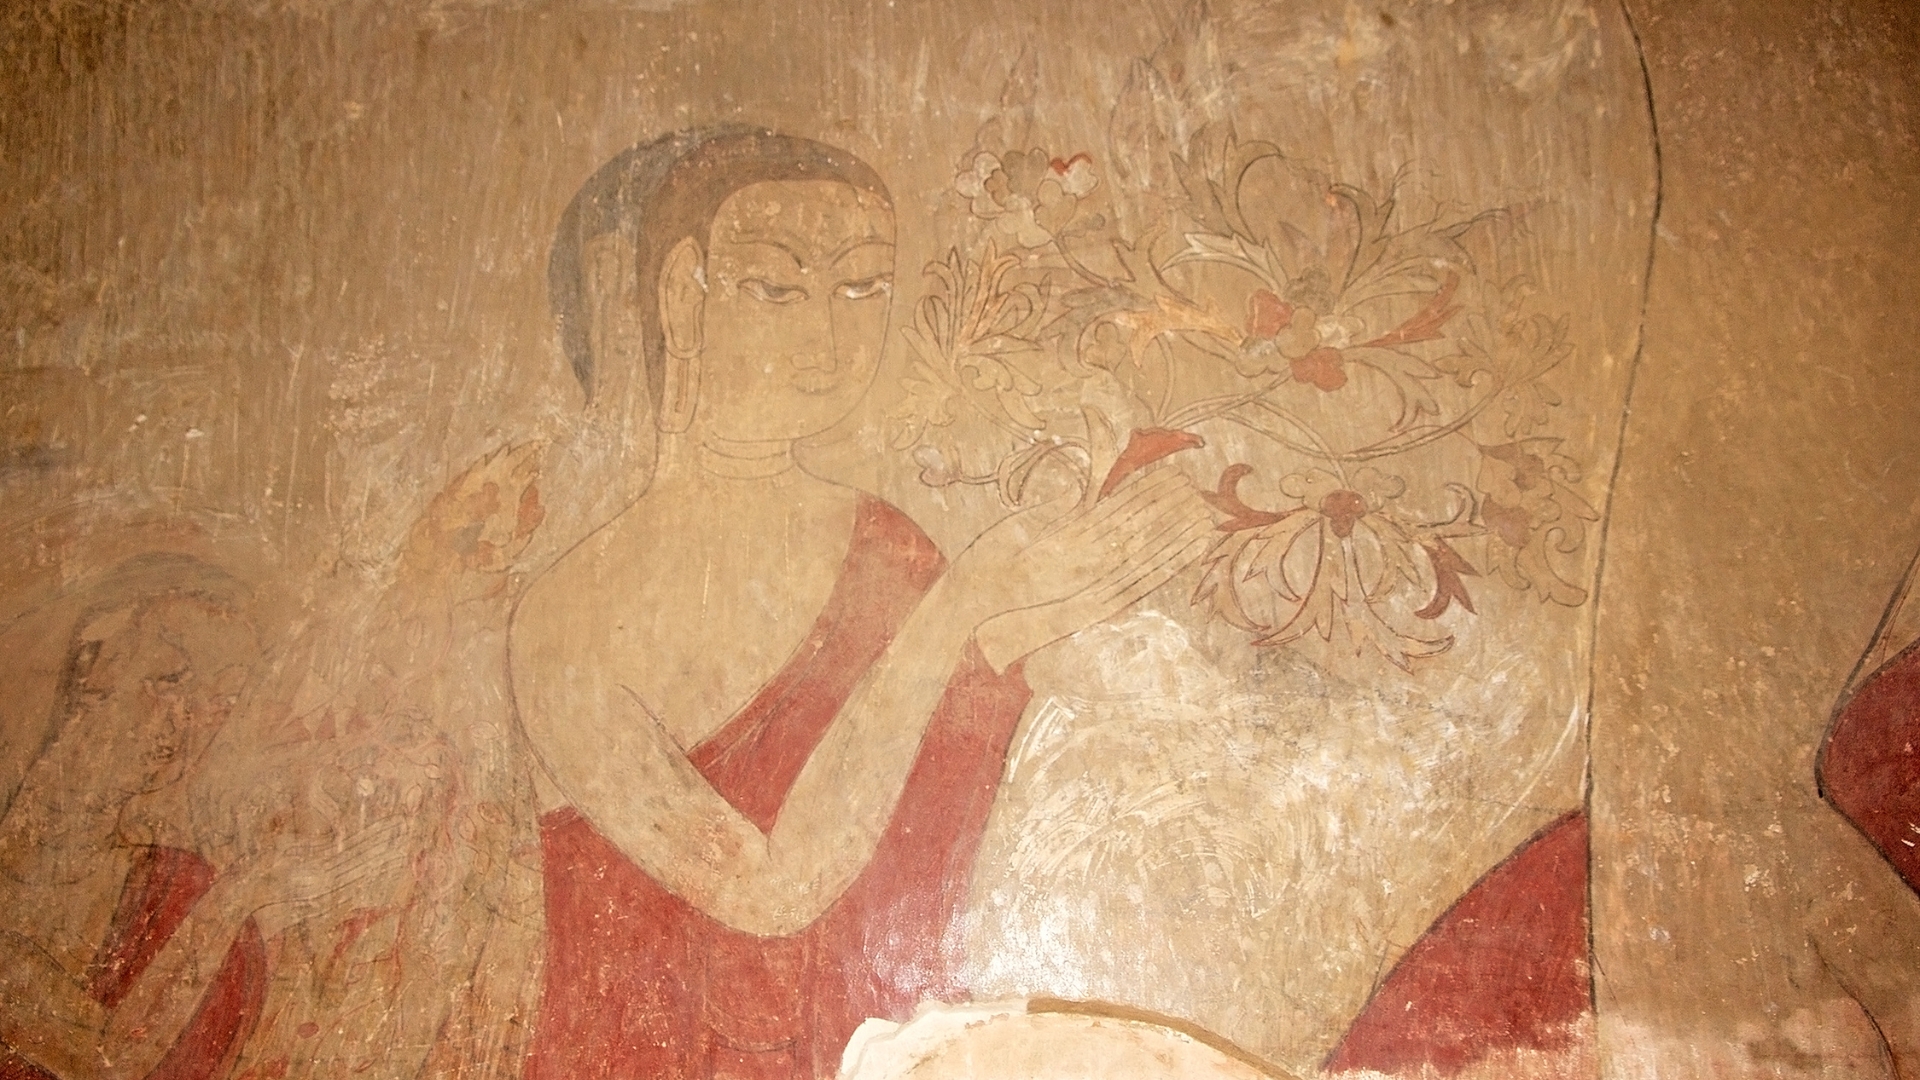 Mural Paintings Showcase Detailed Paintings Illustrating Stories From The Life Of Buddha